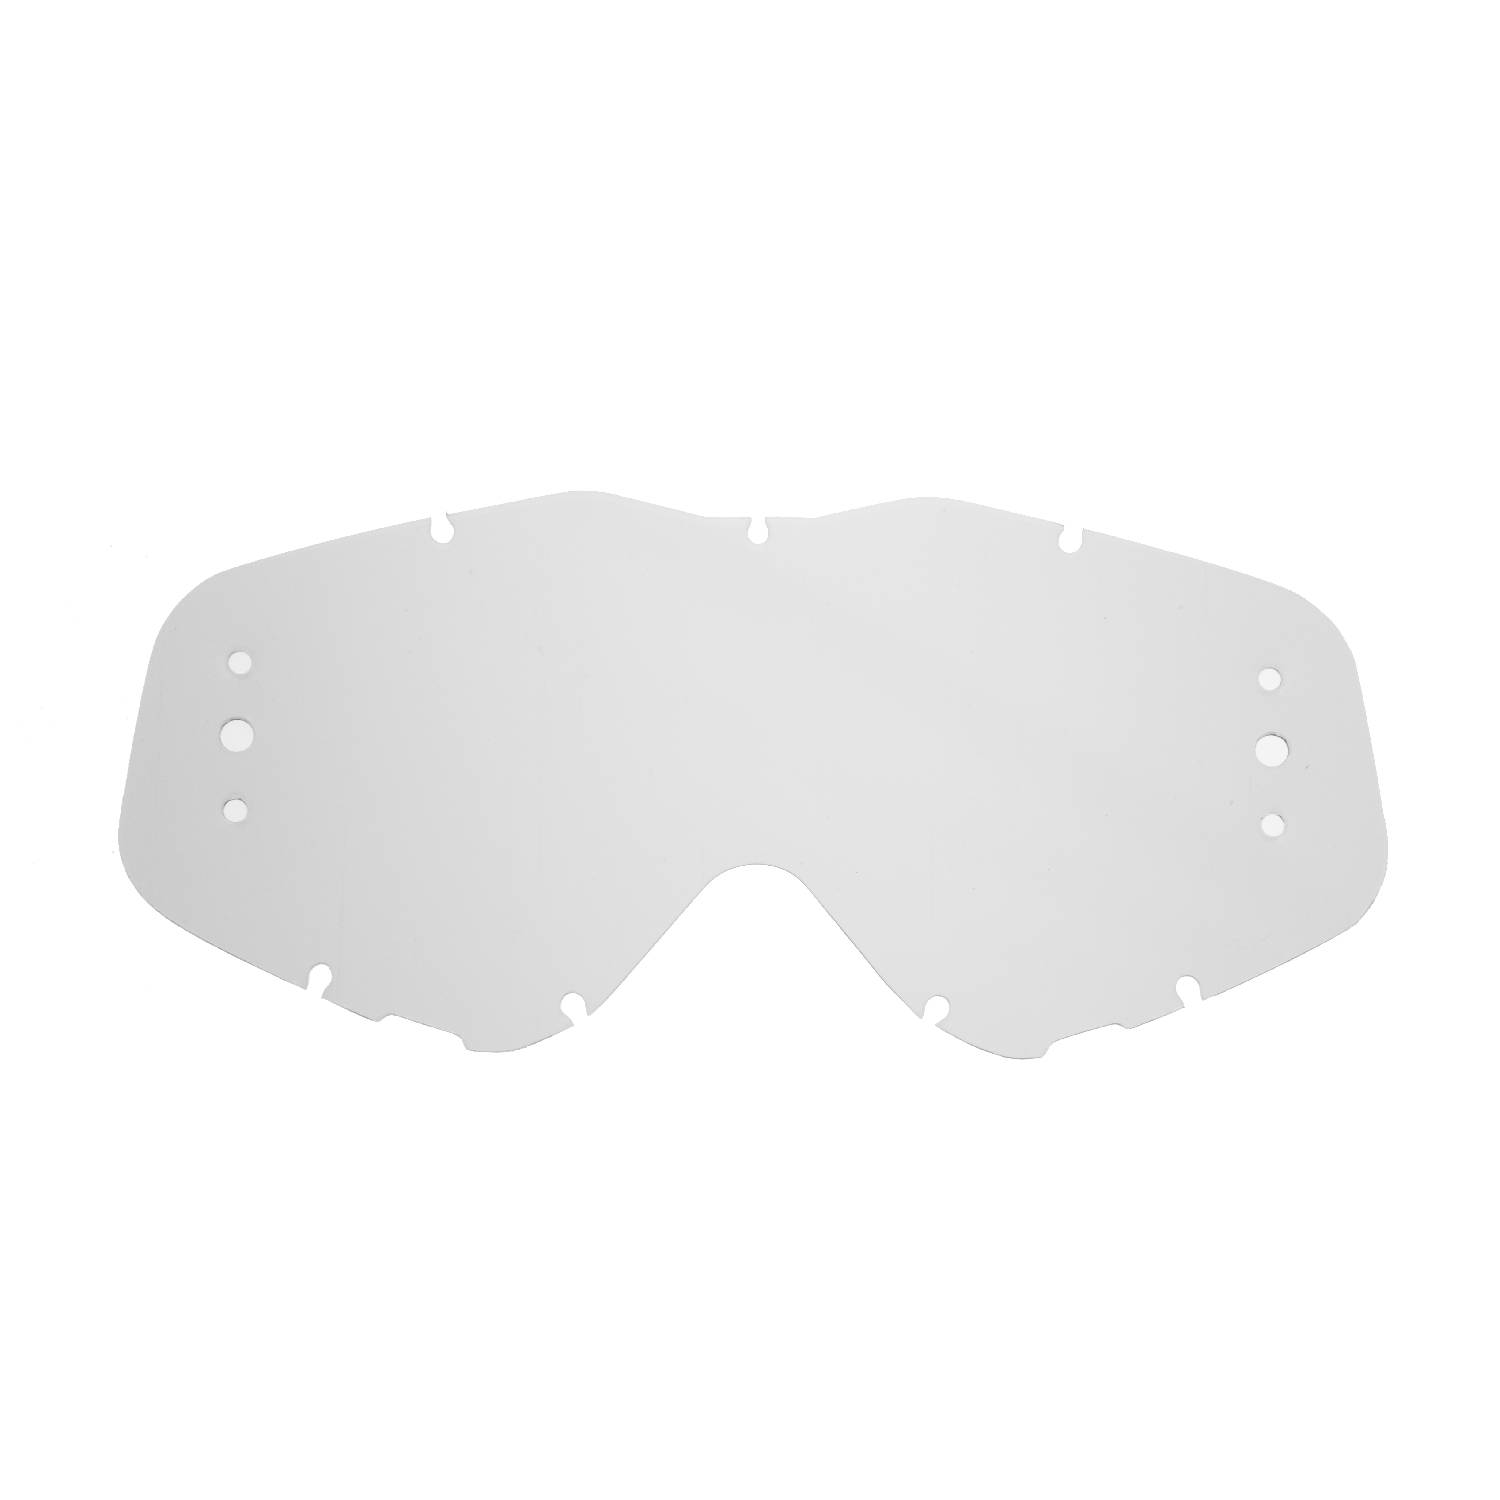 roll off lenses with clear lenses compatible for Spy Klutch goggle